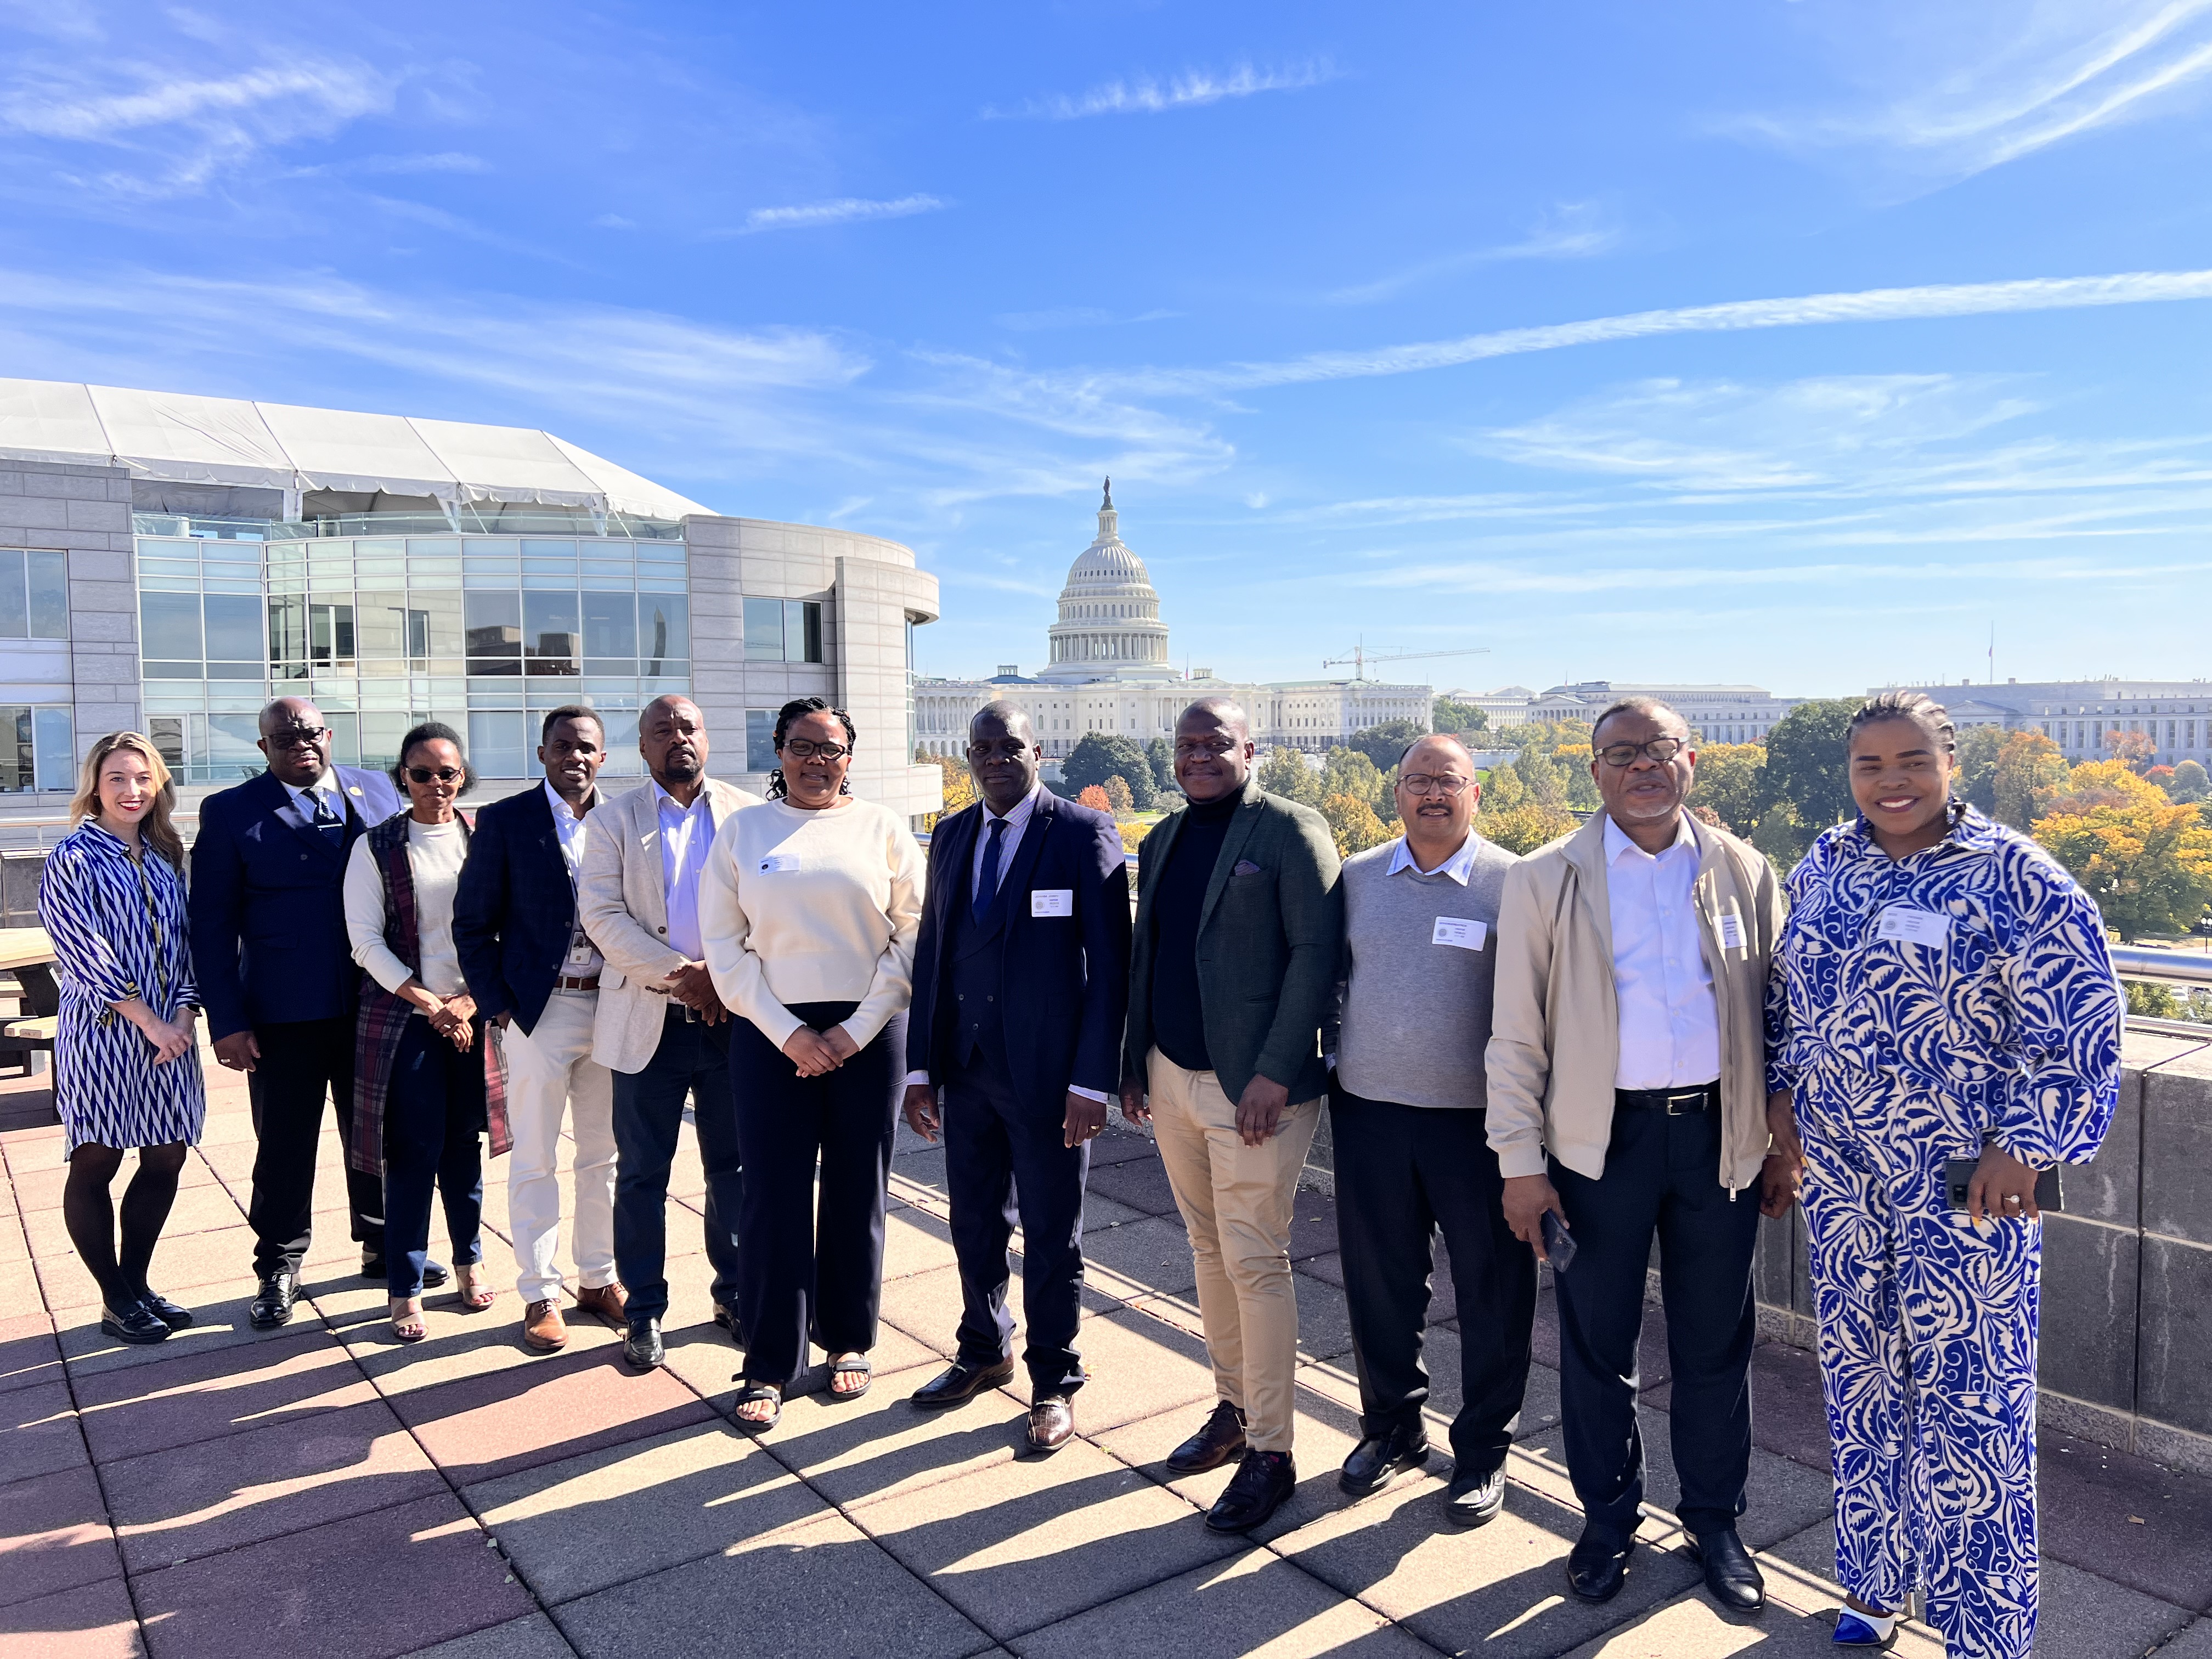 A group of 11 South African and U.S. officials posing on a rooftop overlooking the U.S. Capitol.